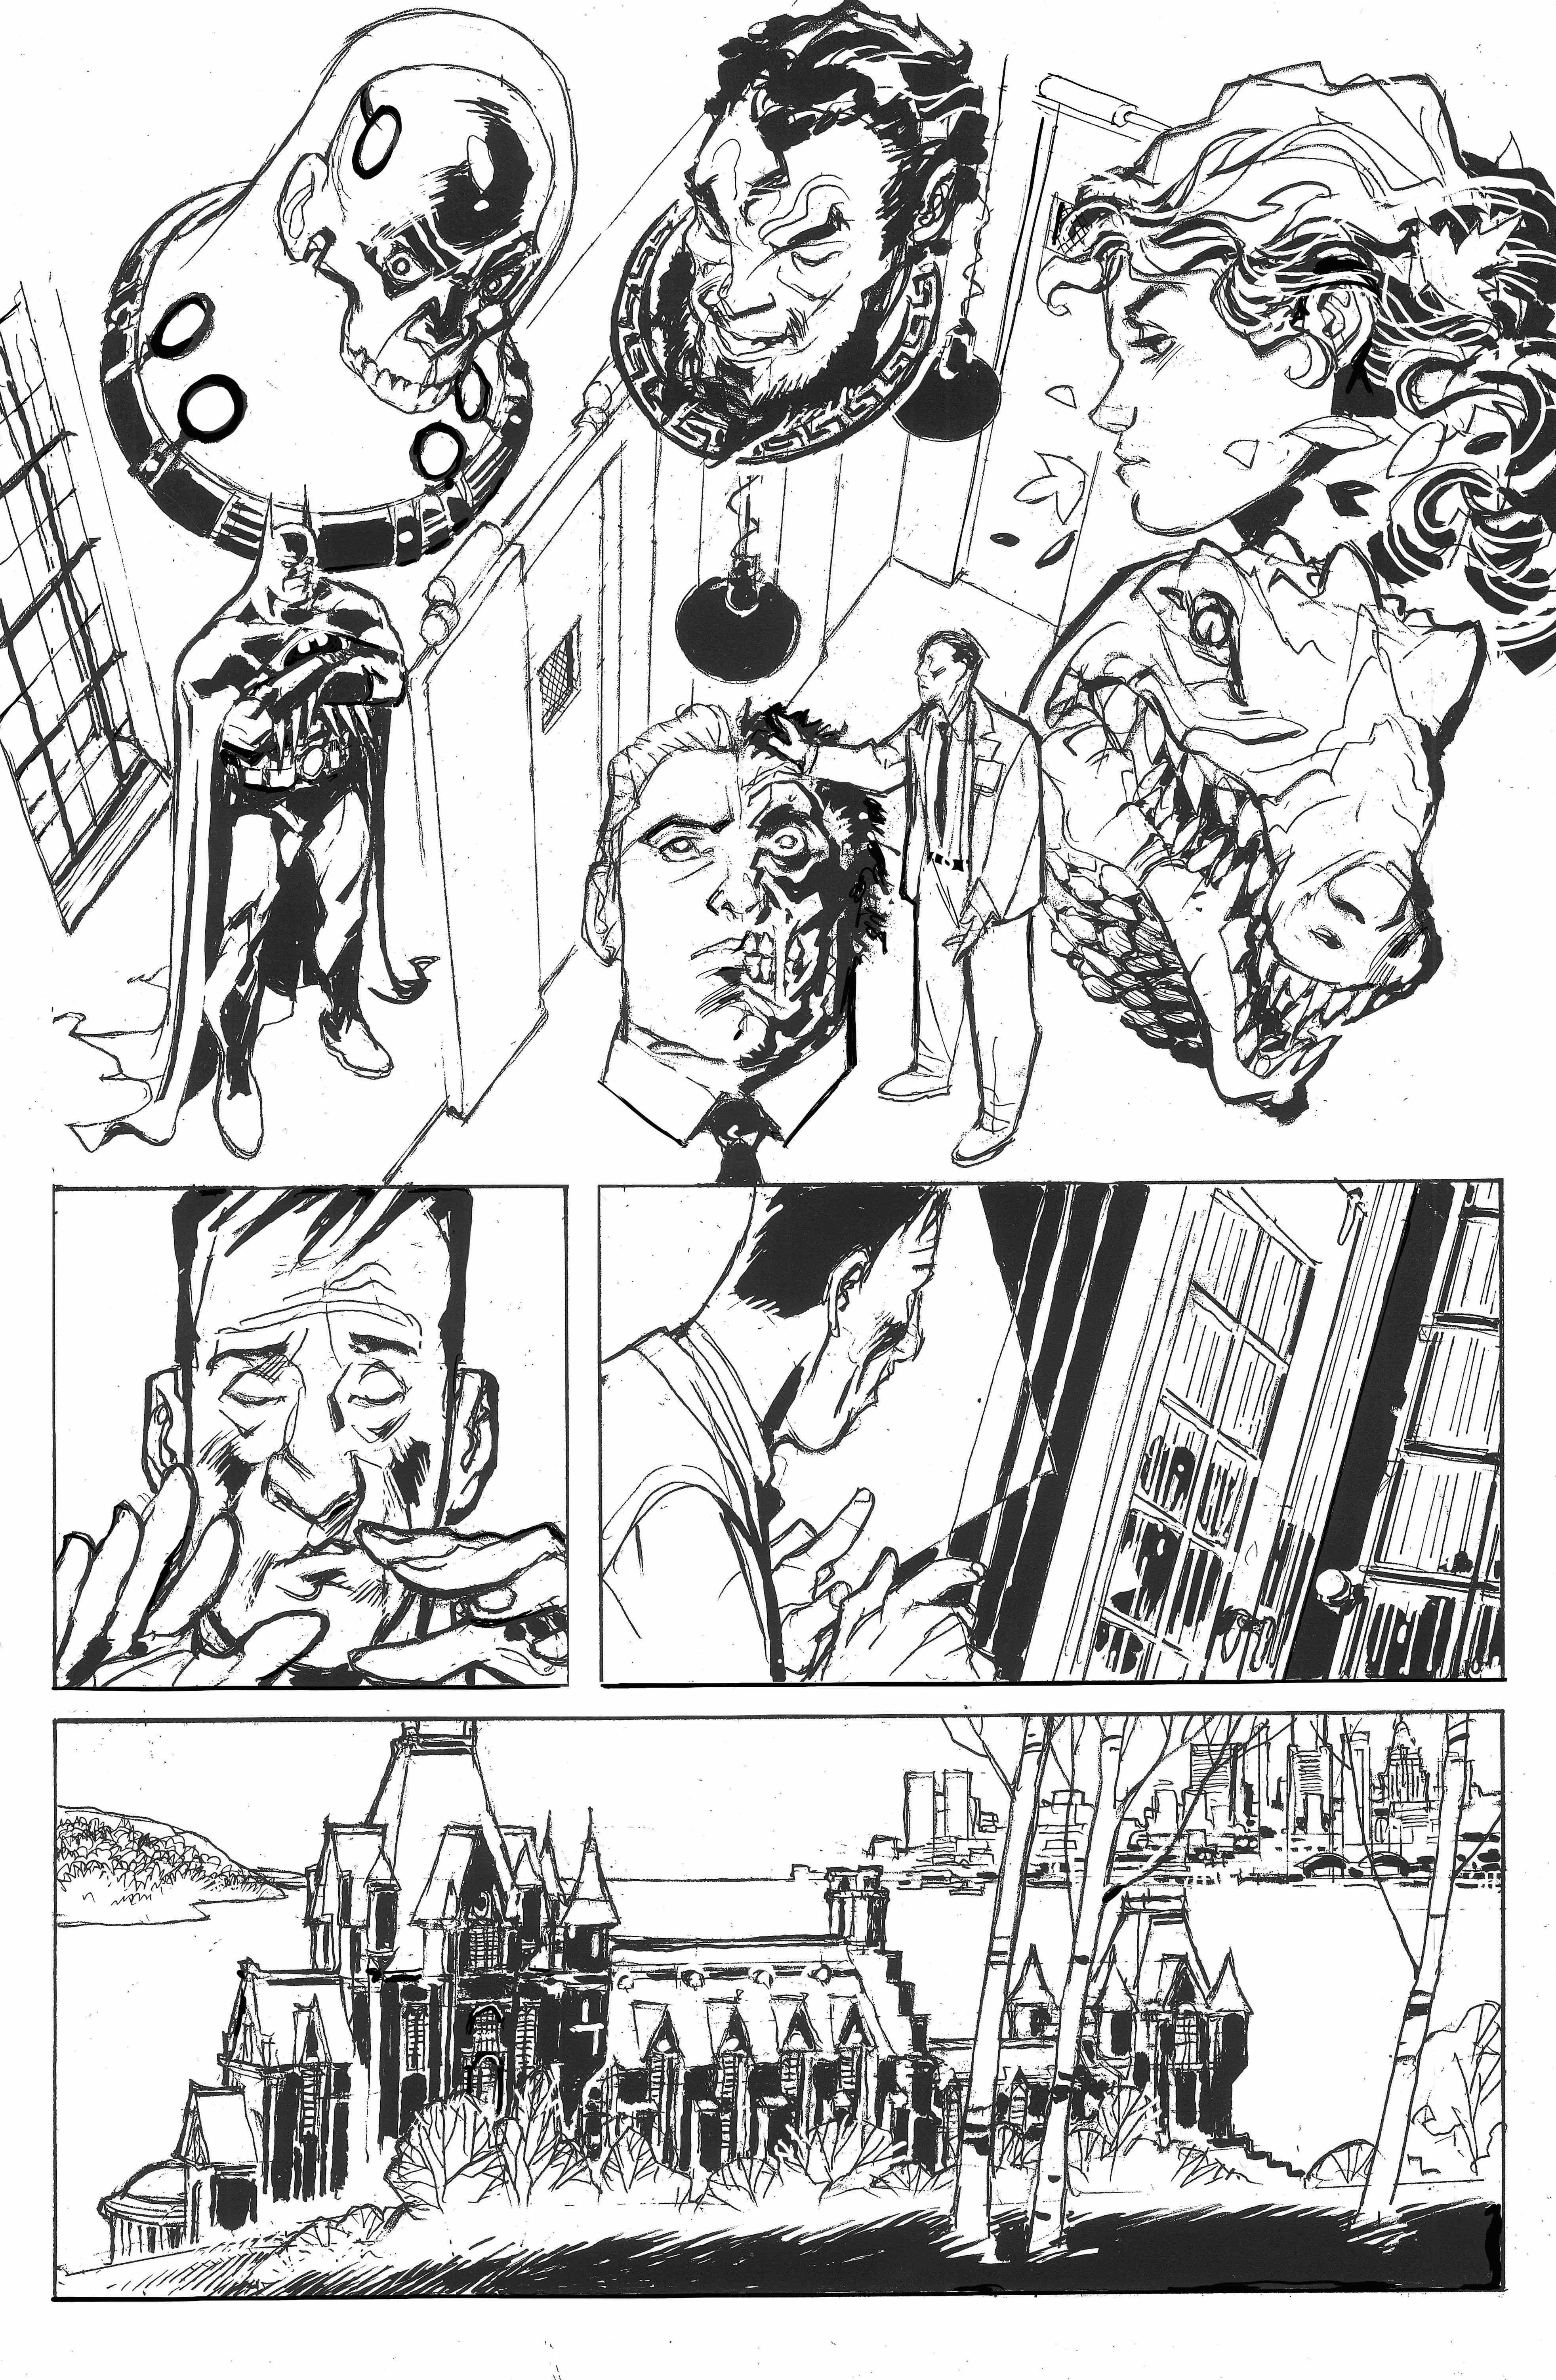 from-the-dc-vault-pencils1.jpg